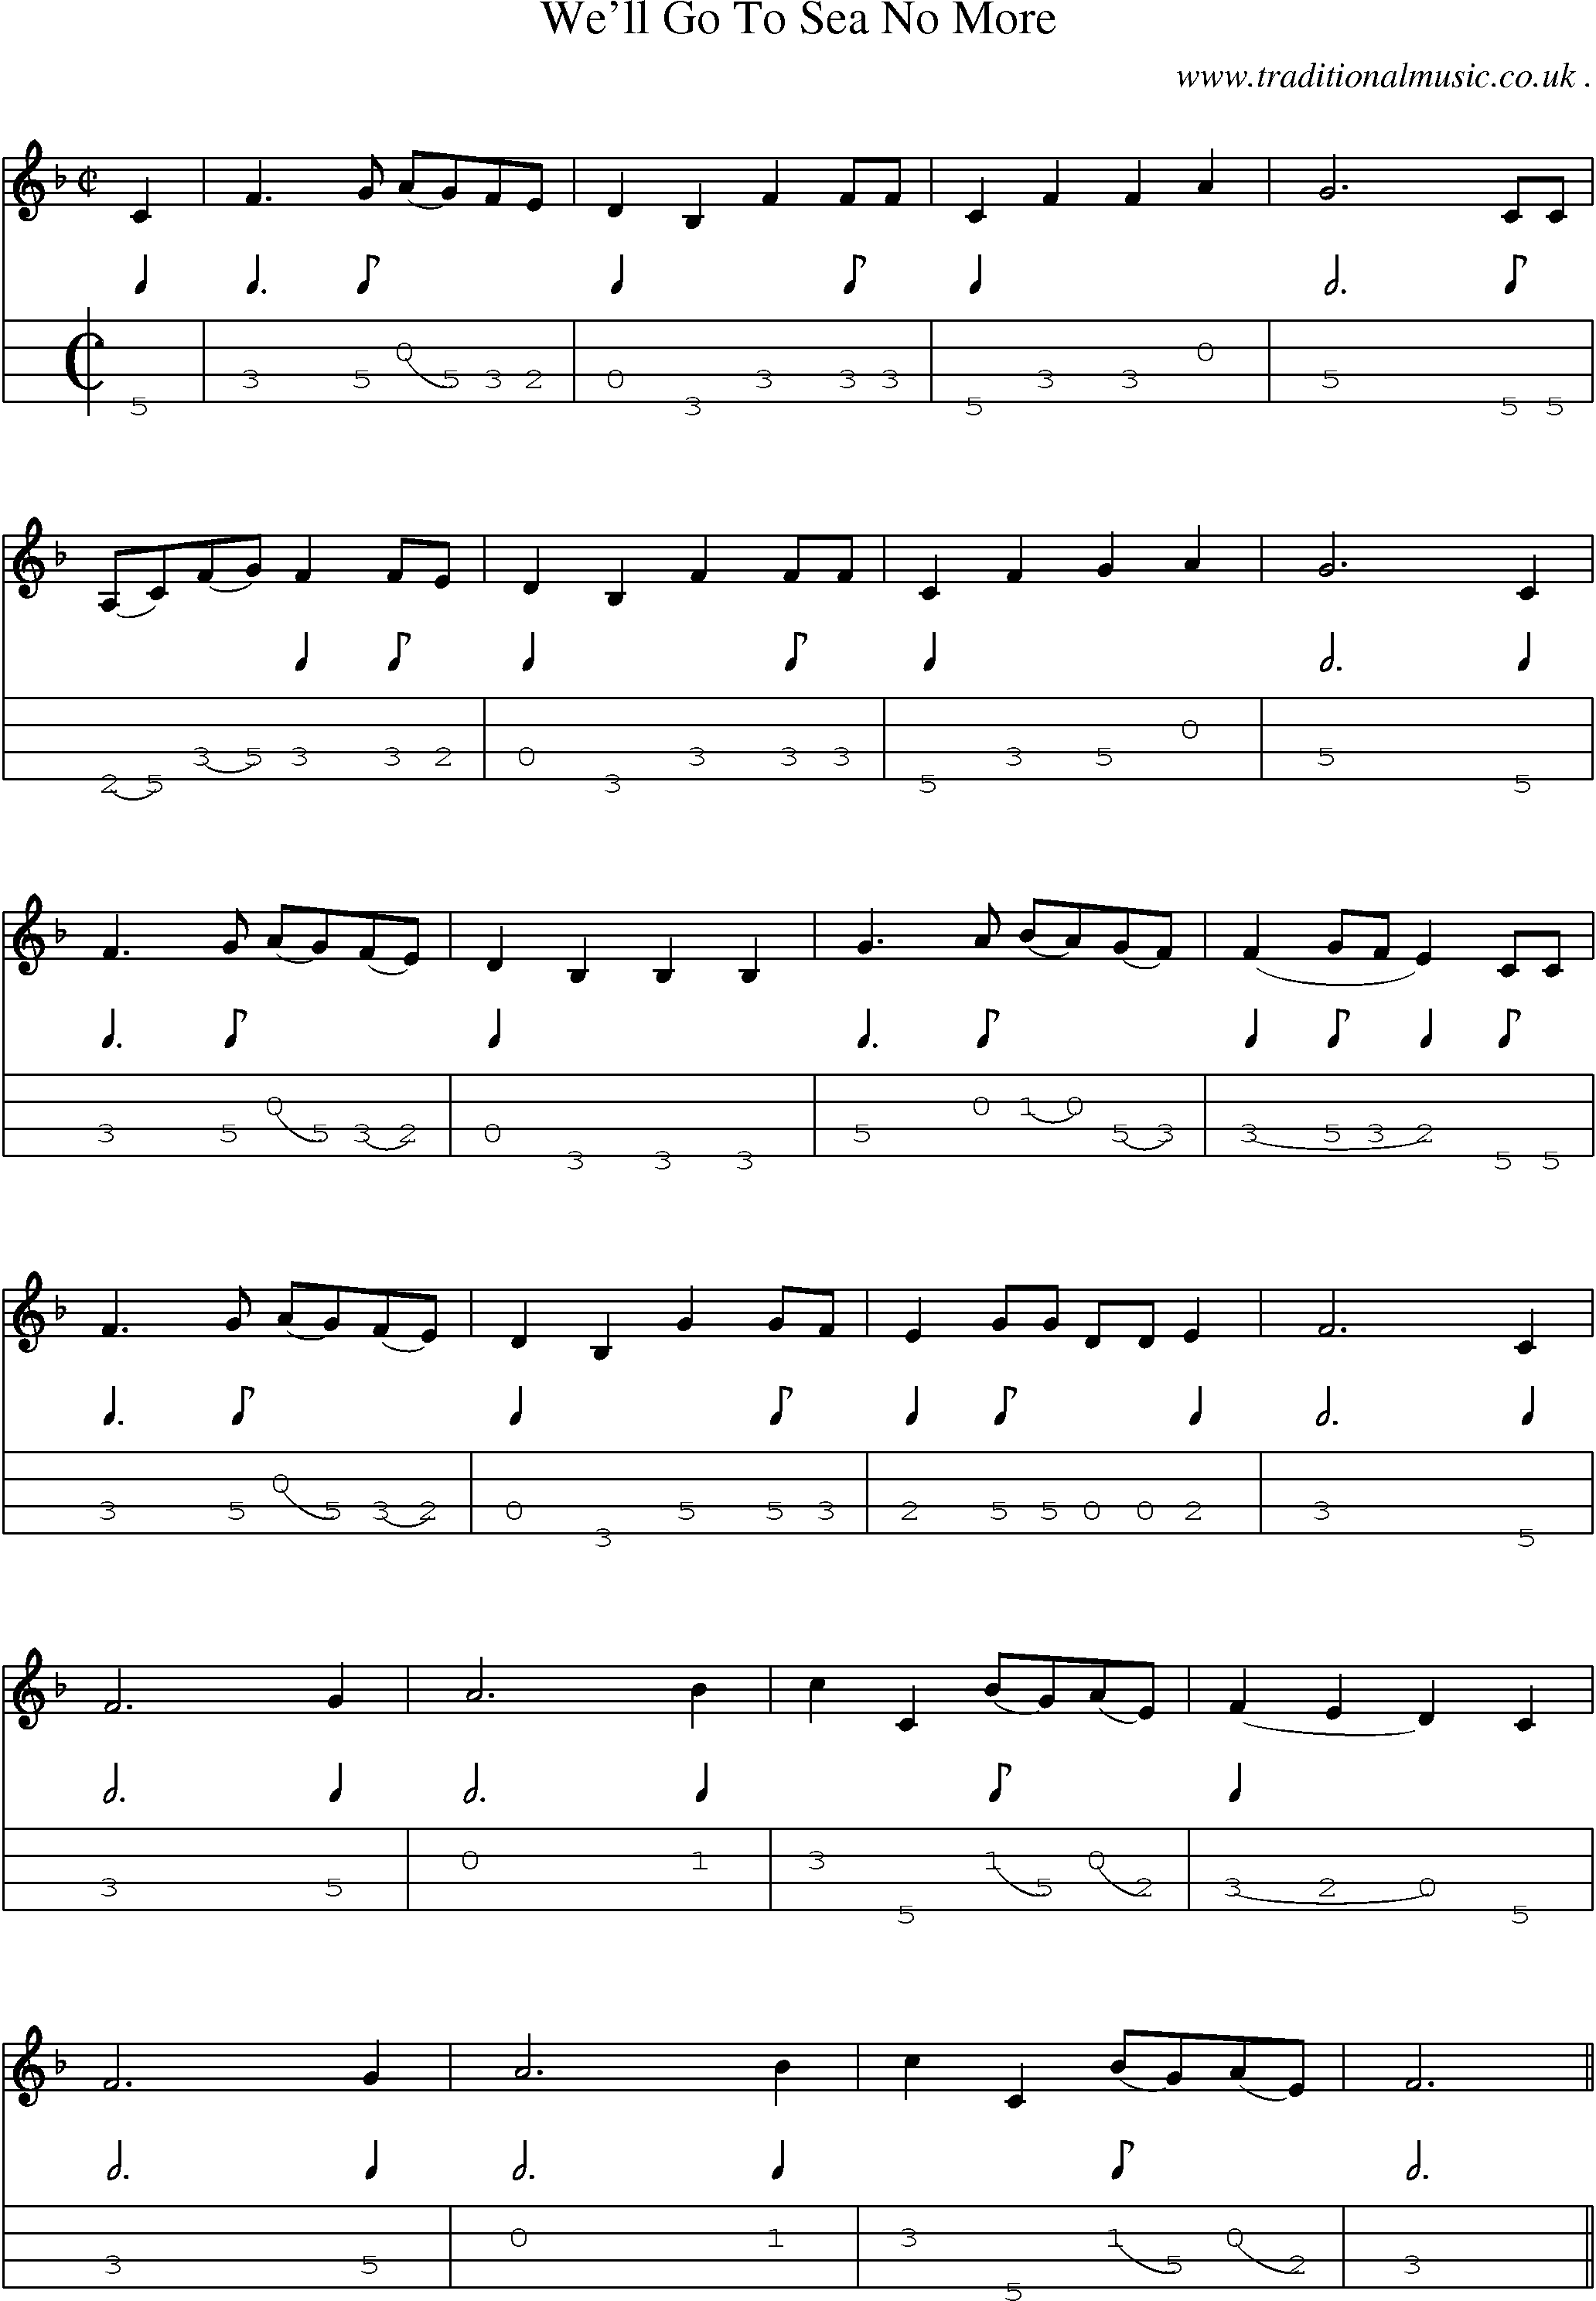 Sheet-Music and Mandolin Tabs for Well Go To Sea No More